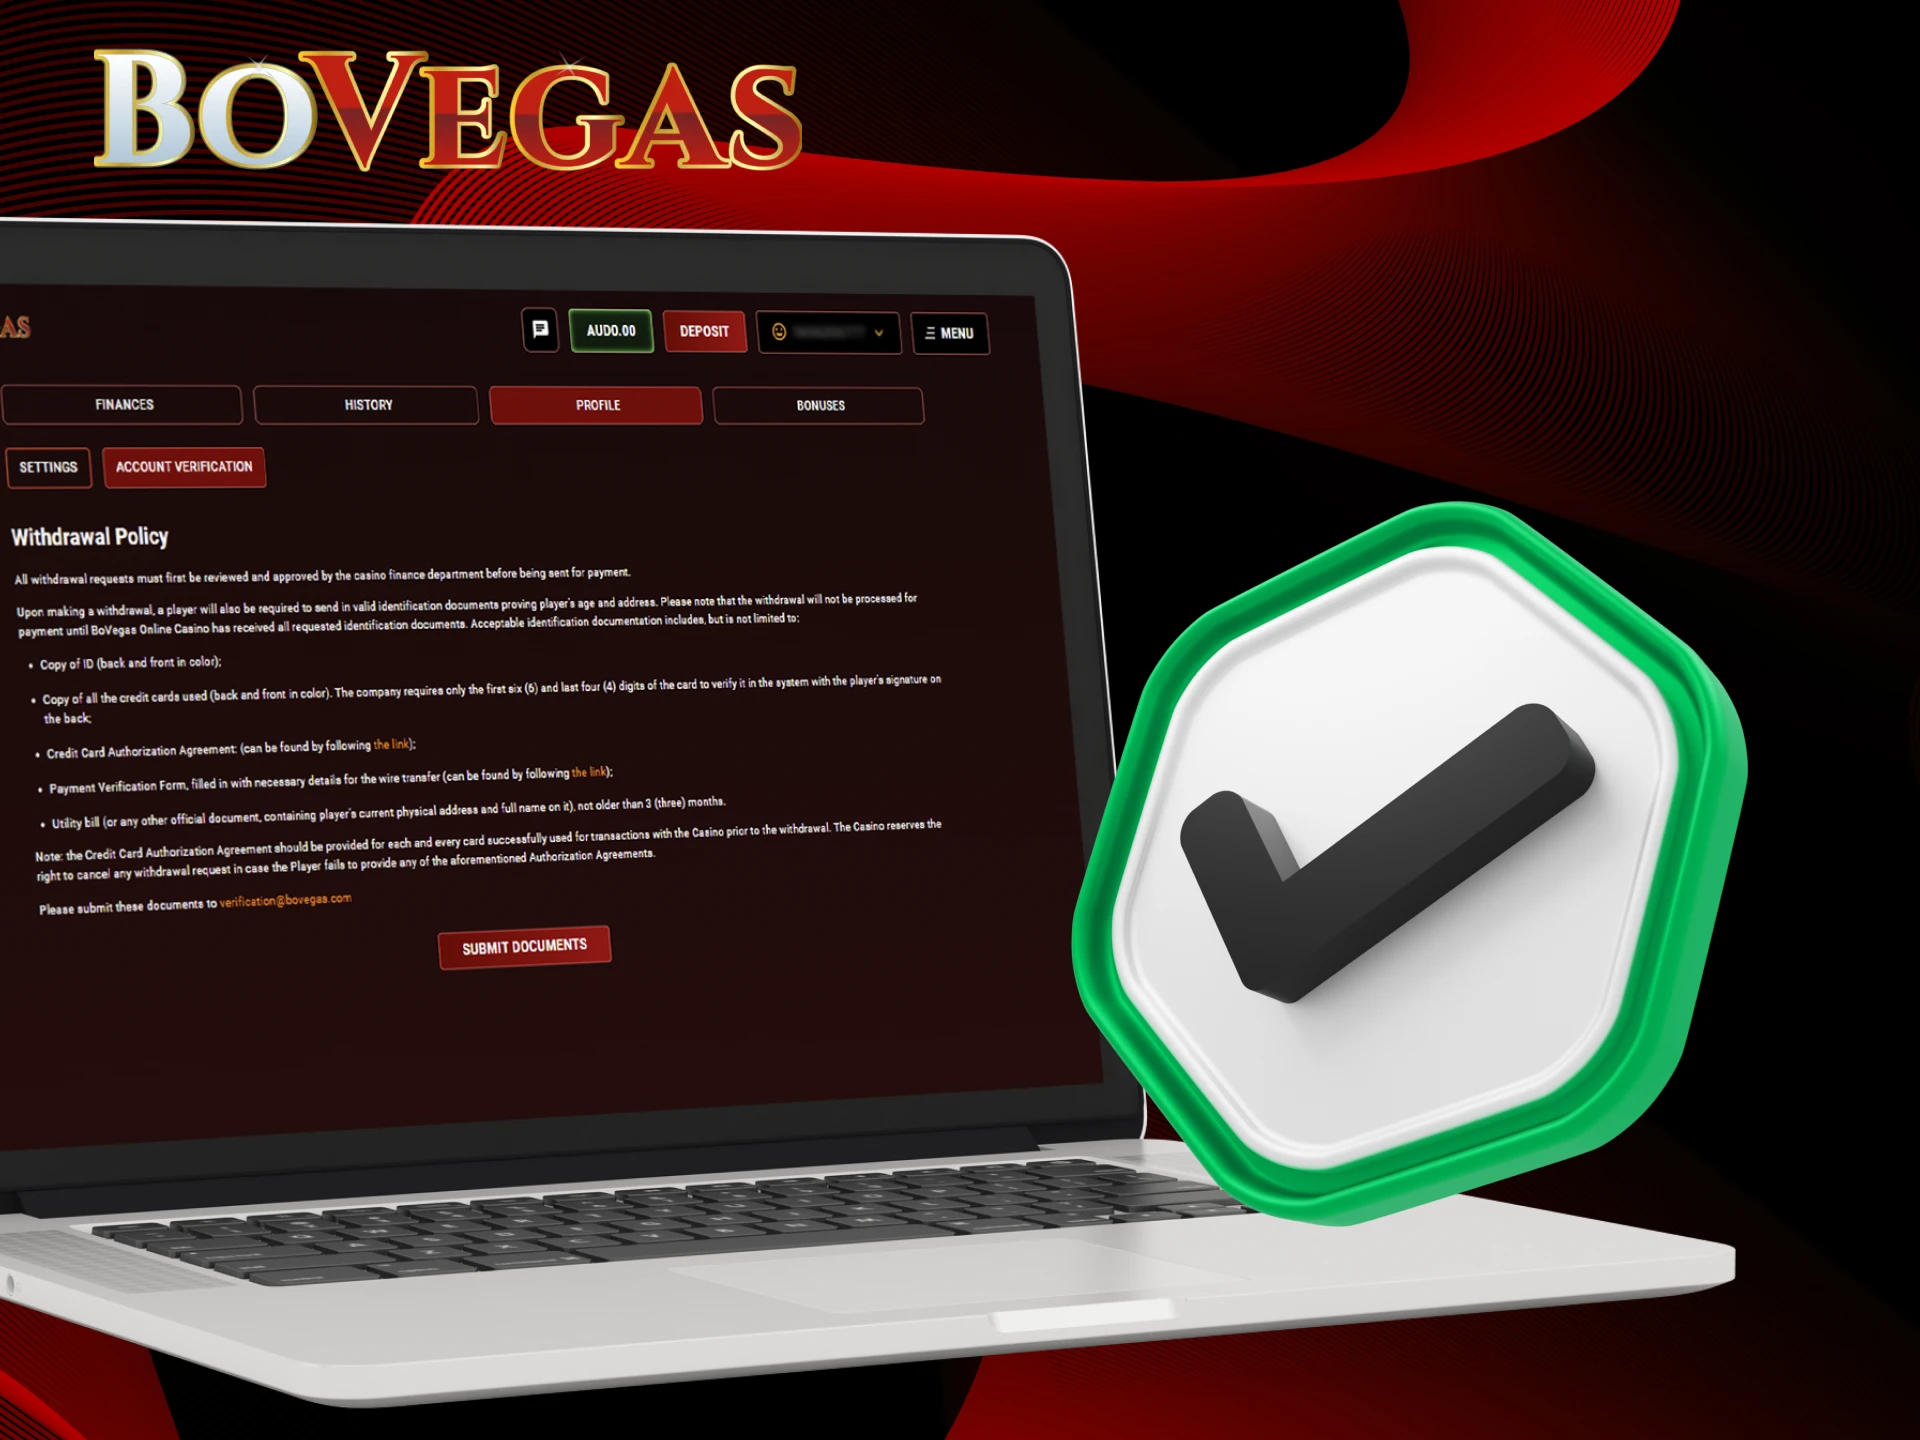 Verify your account in order to withdraw money from BoVegas Casino.